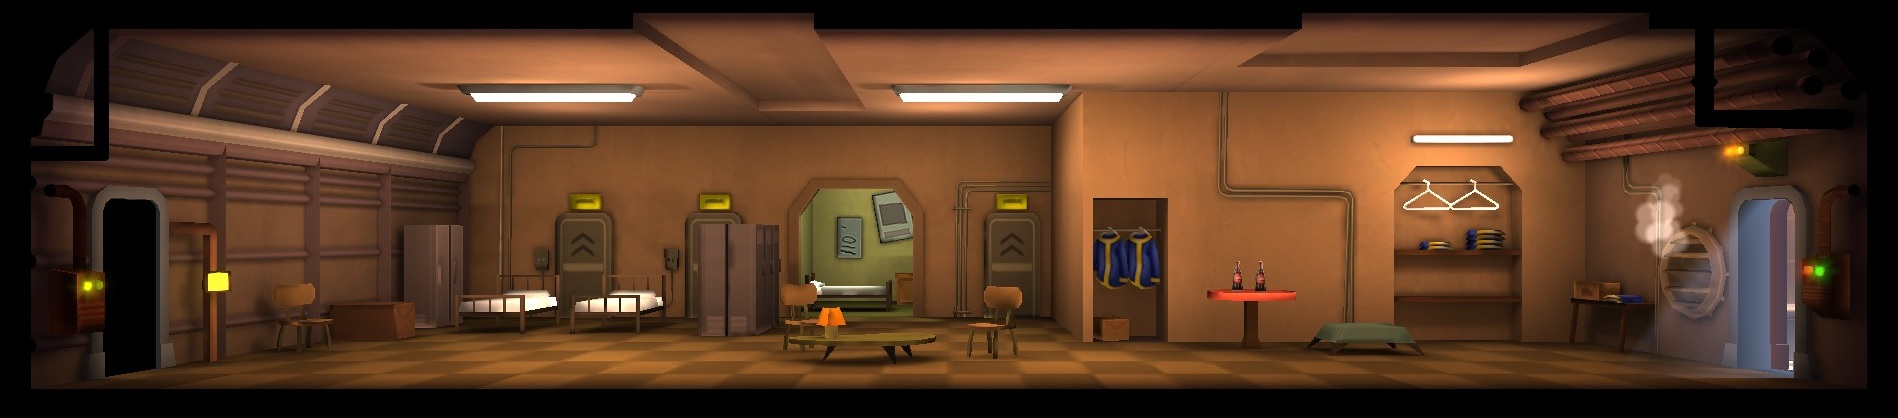 fallout shelter 3 wide living quarters